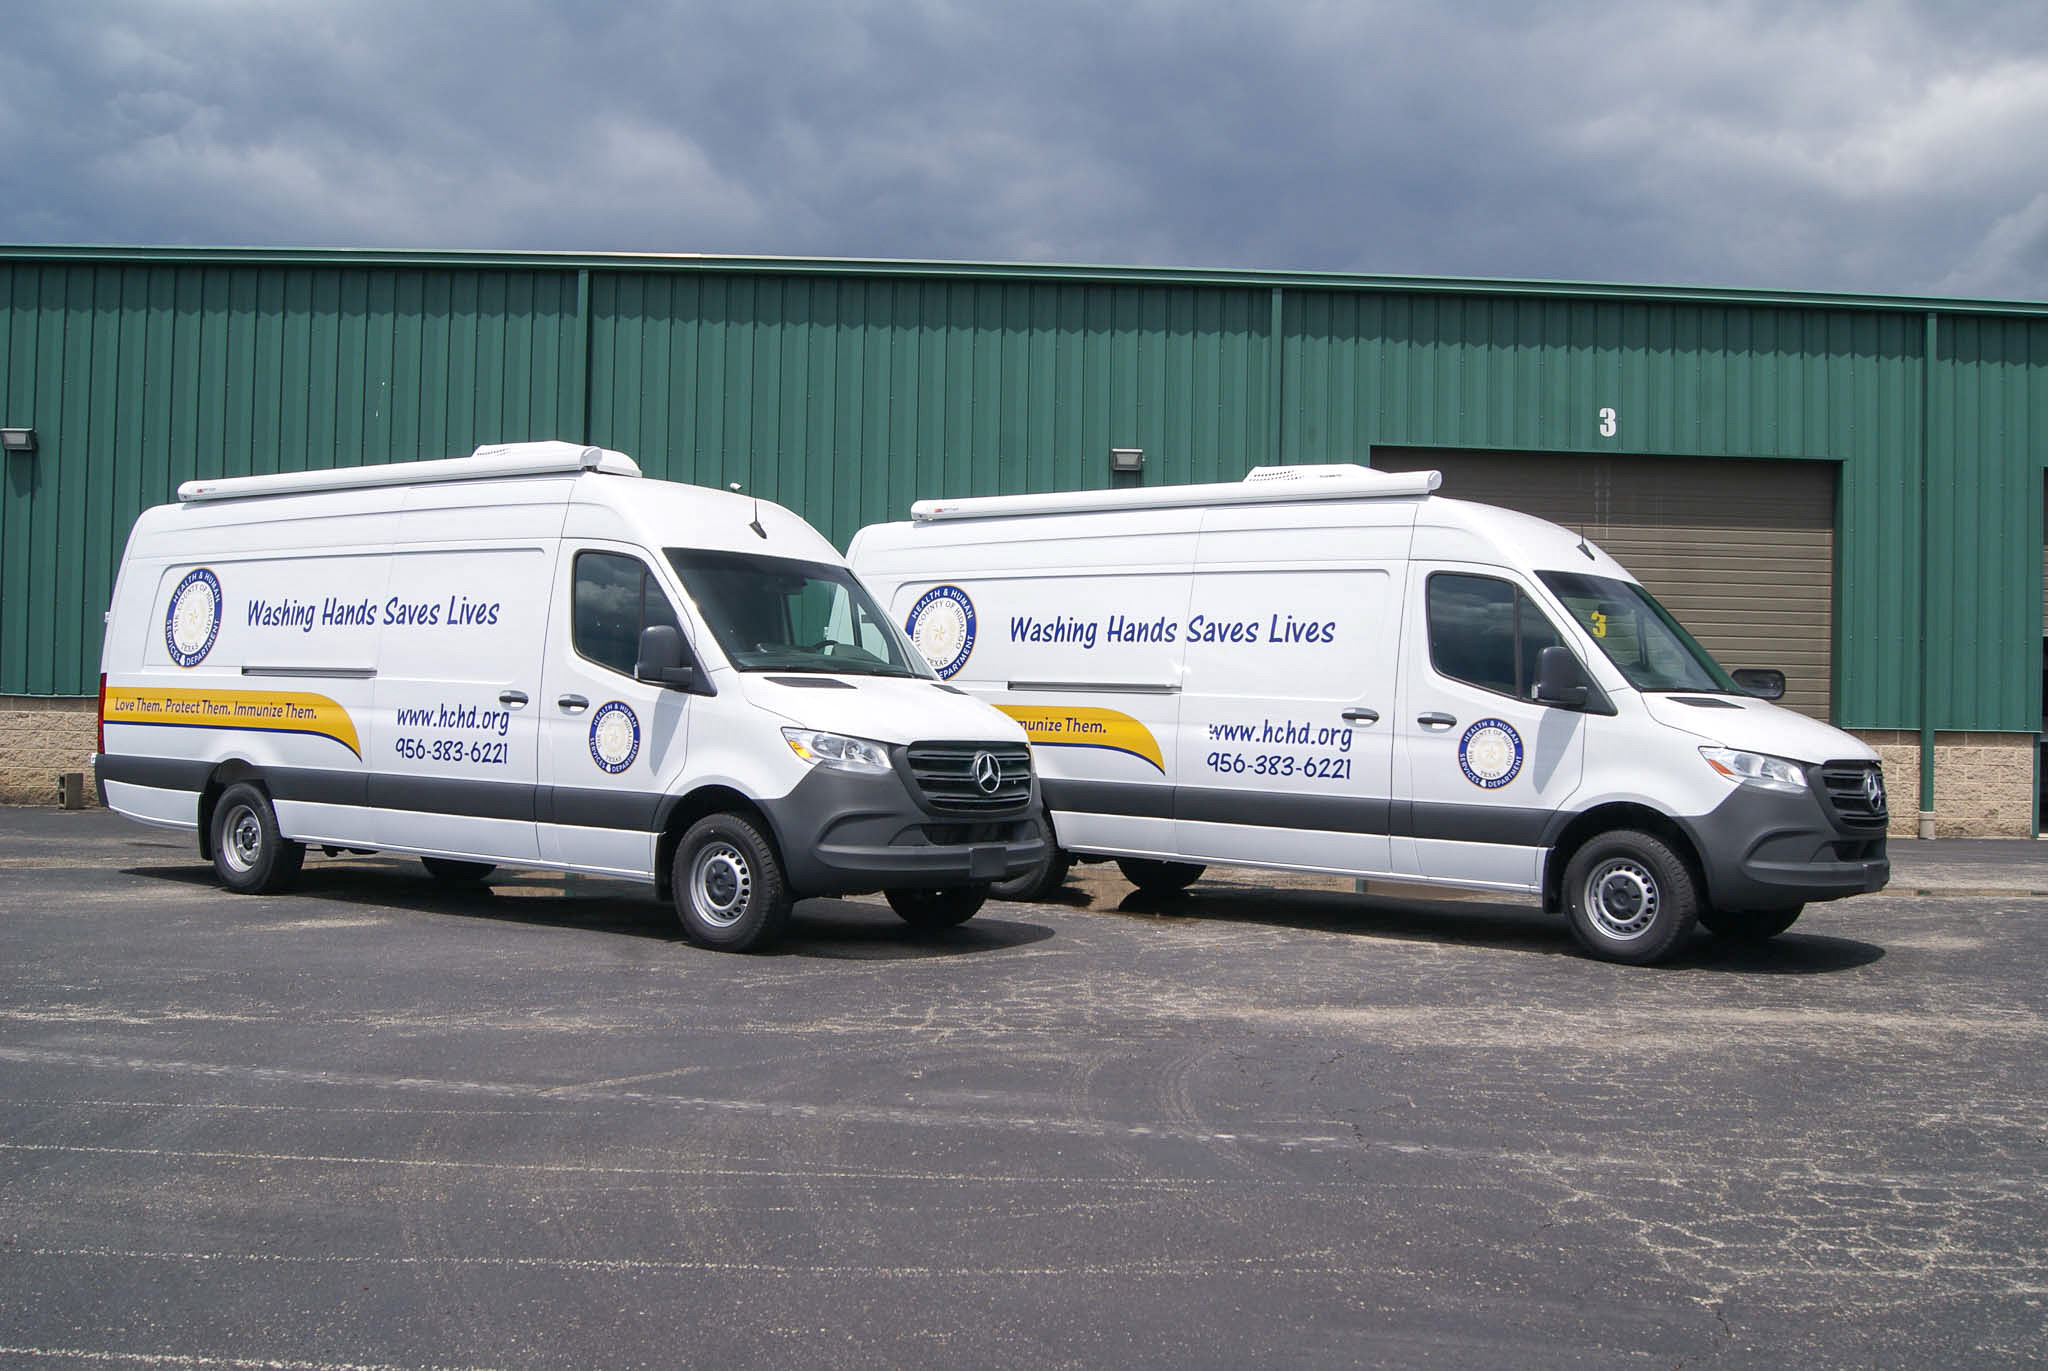 Two customized Mobile Medical Exam sprinter vans for Hidalgo County's Health Department are parked next to one another. The graphics feature their website, phone number, and the phrases, "Washing Hands Saves Lives," and "Love Them. Protect Them. Immunize Them."